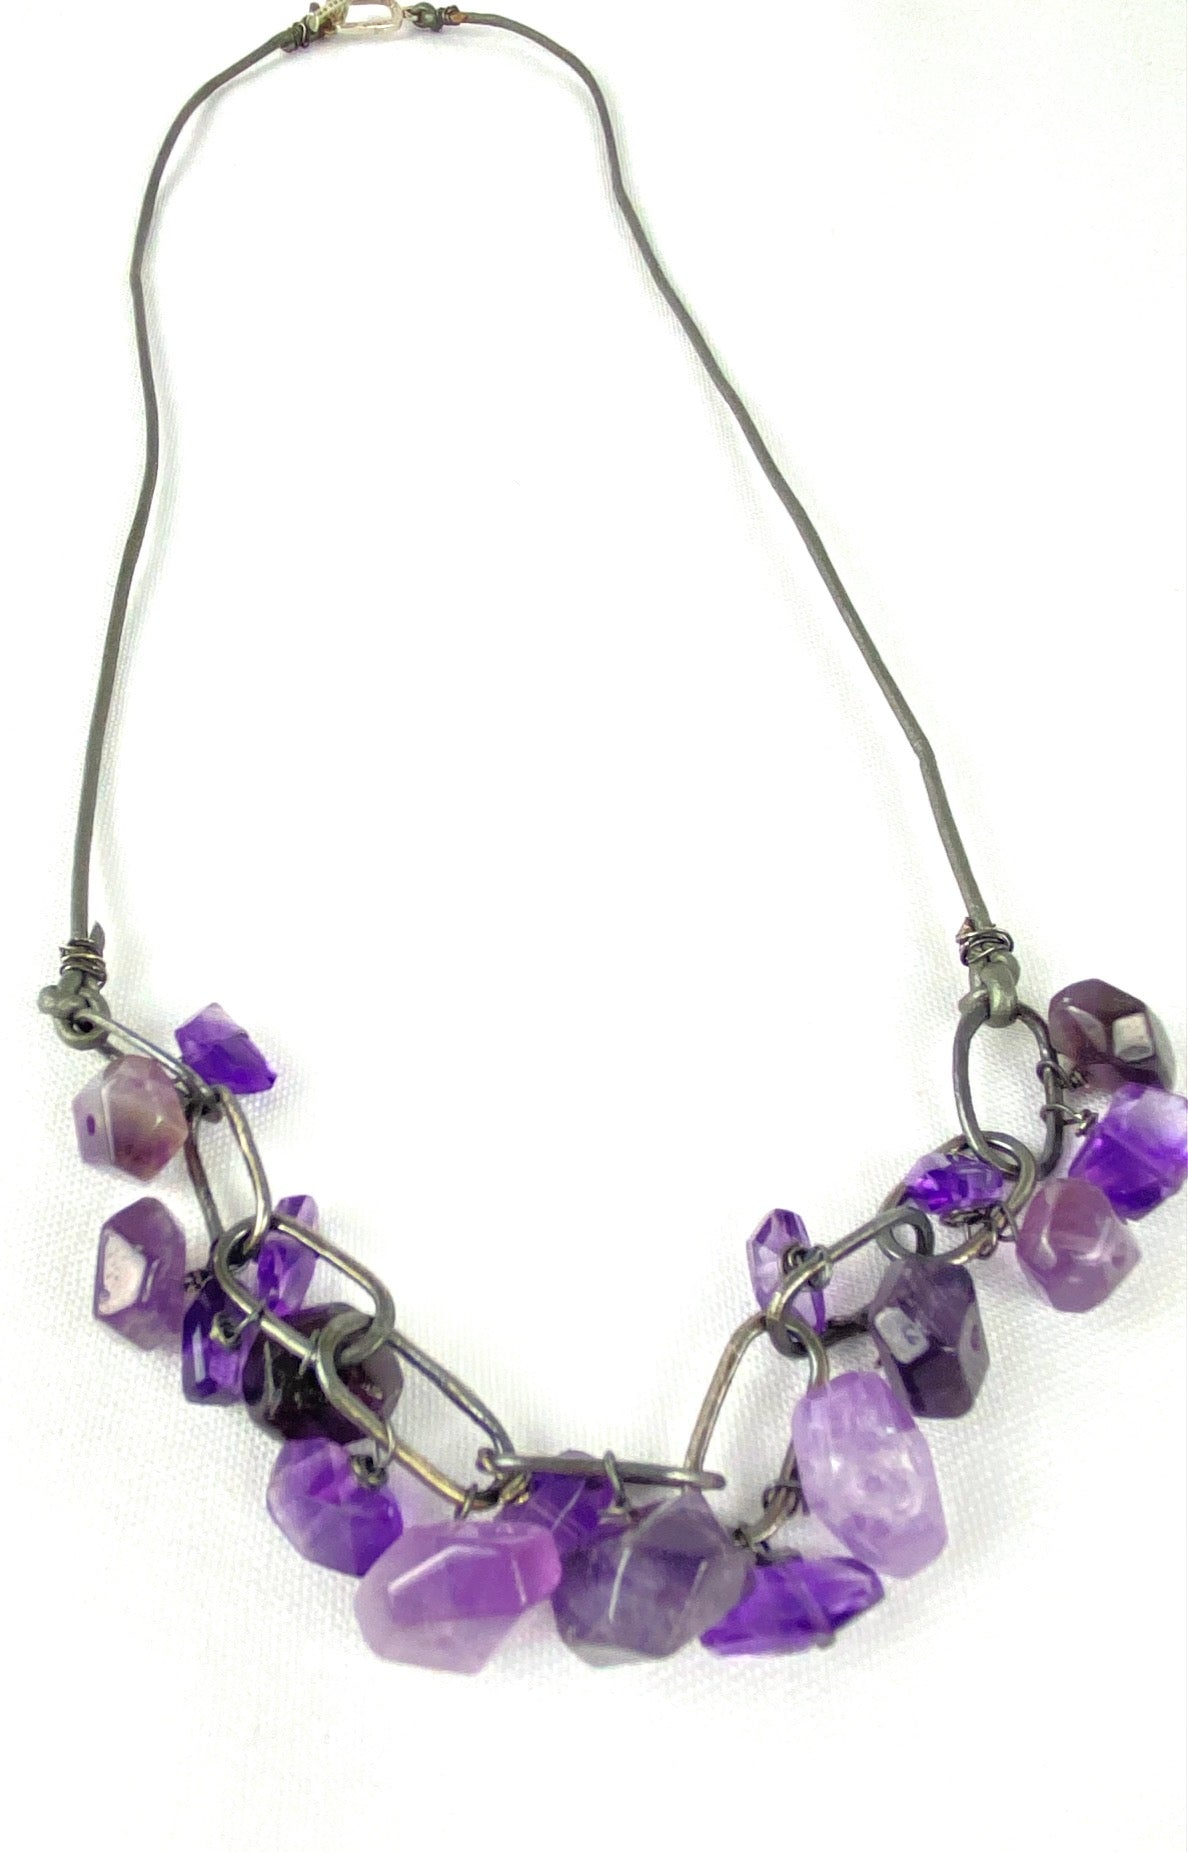 Distinctive Amethyst and leather and silver necklace jewelry